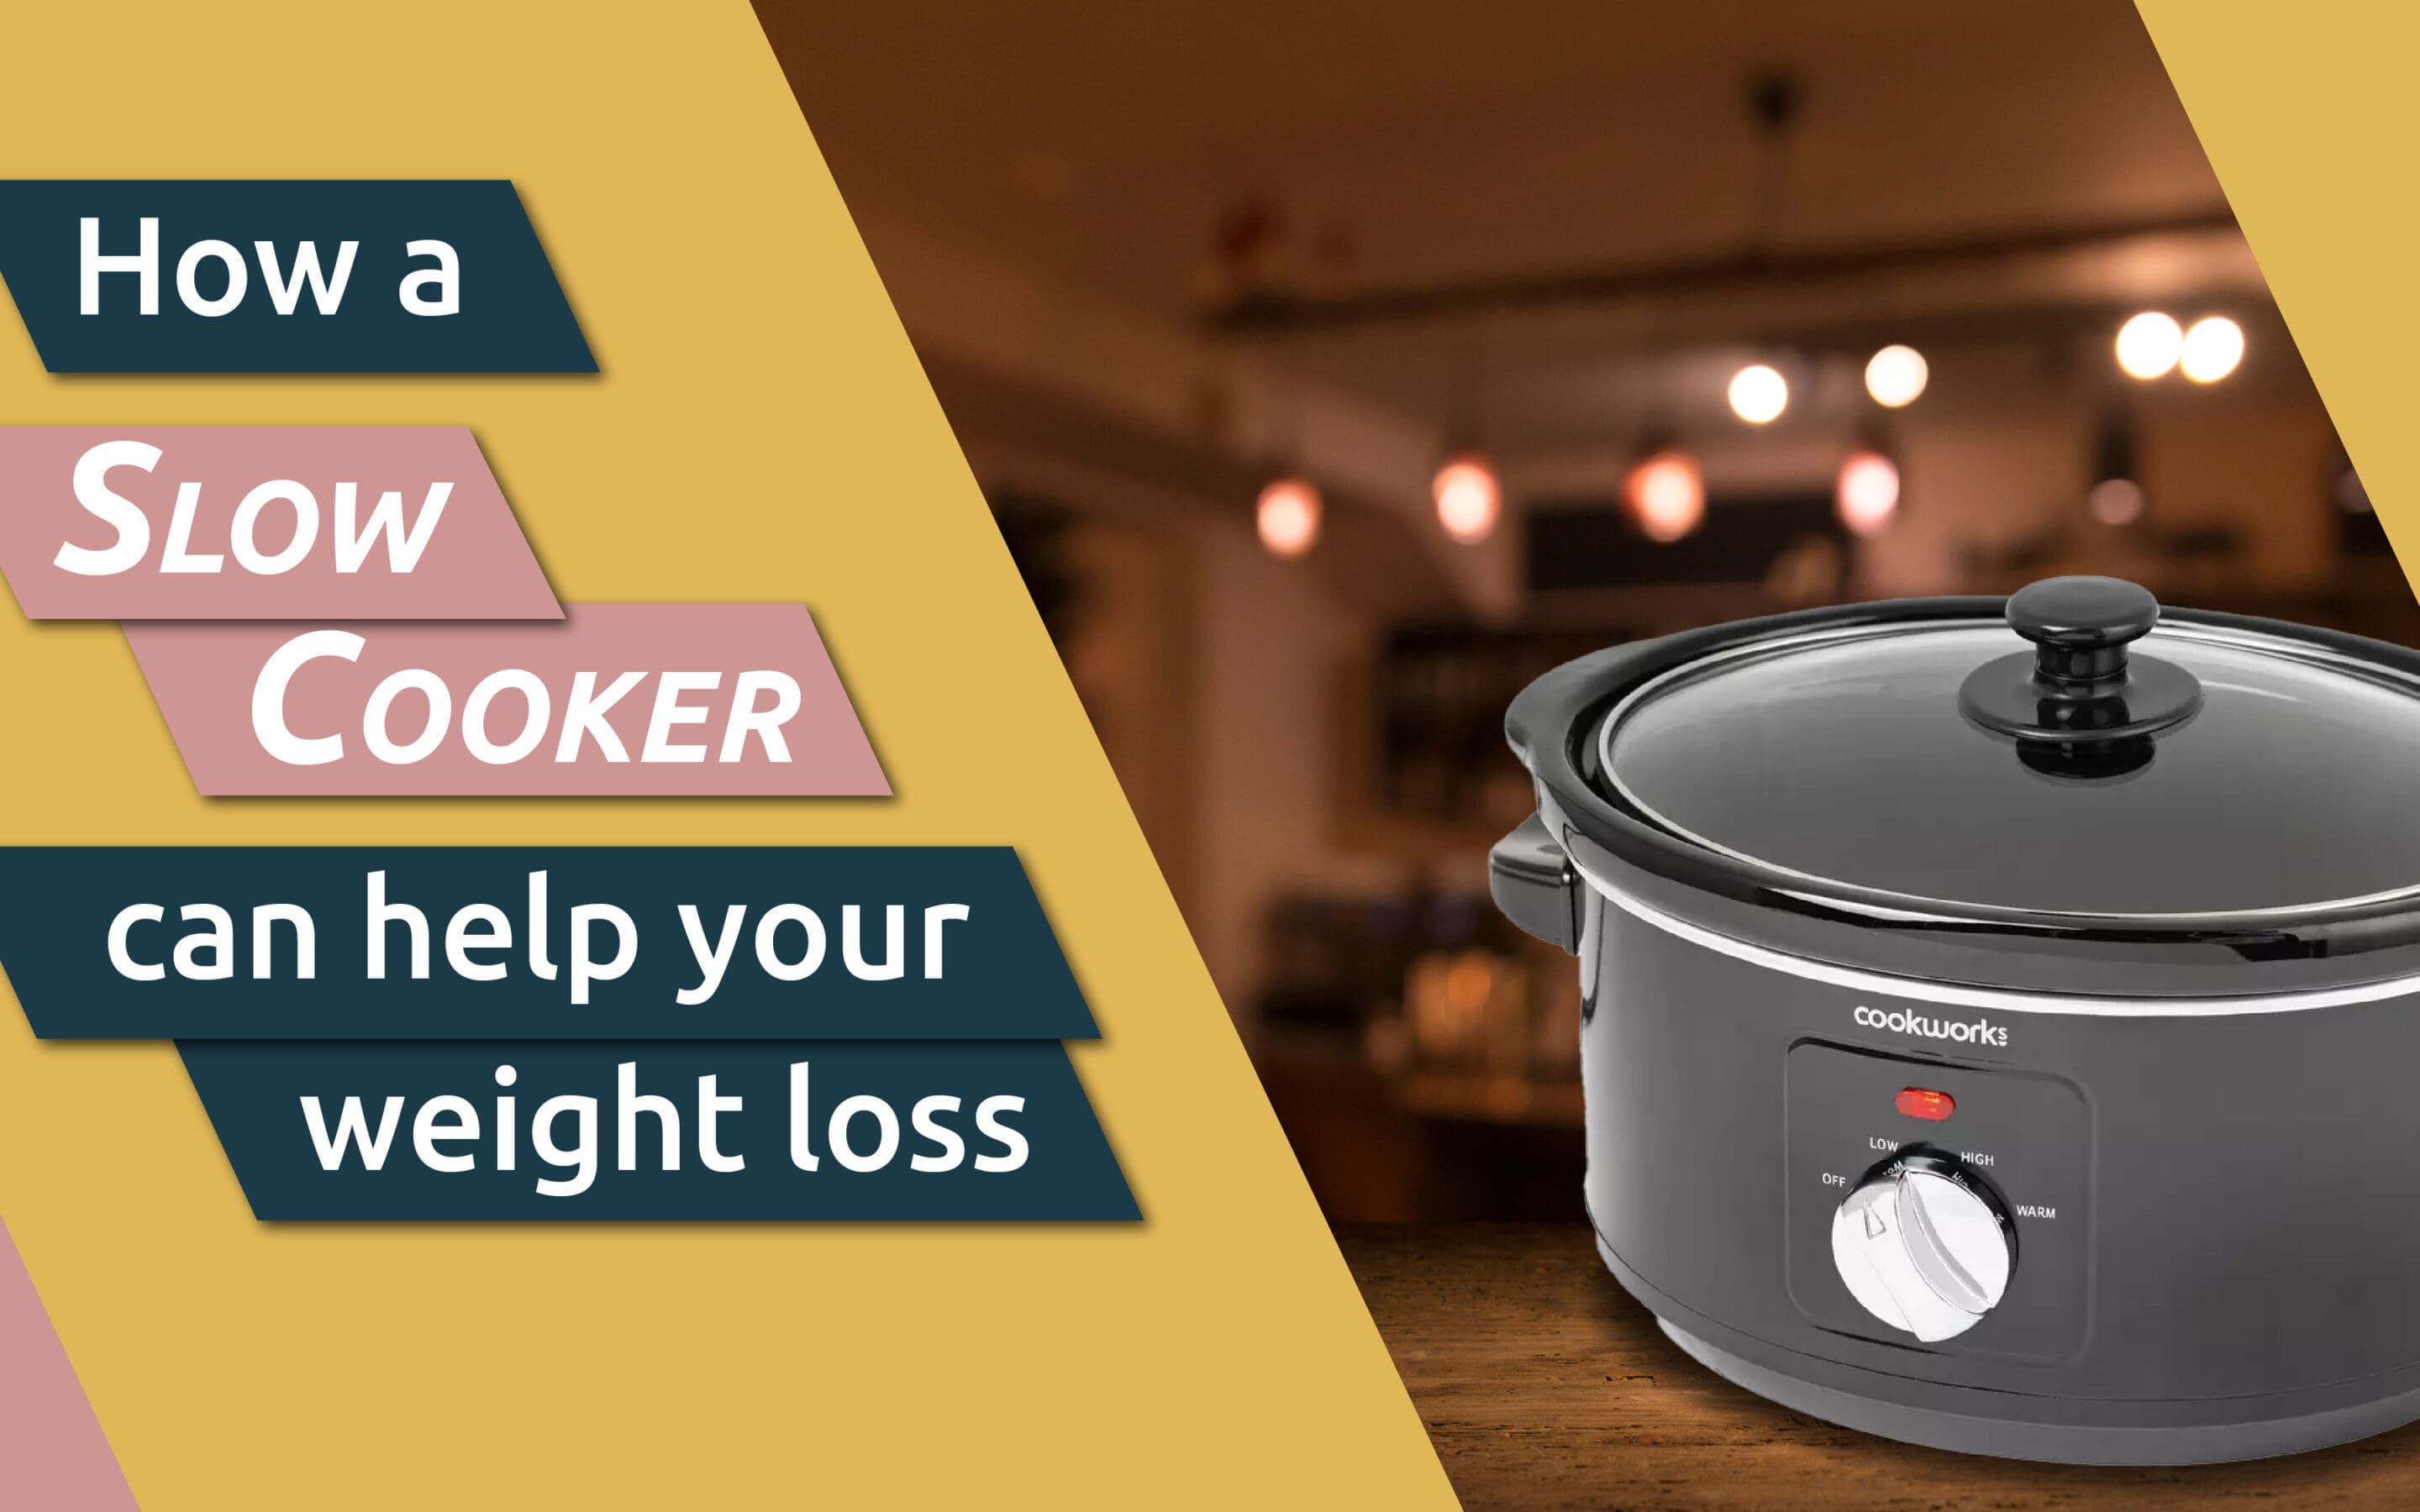 How Your Slow Cooker Can Help You Lose Weight